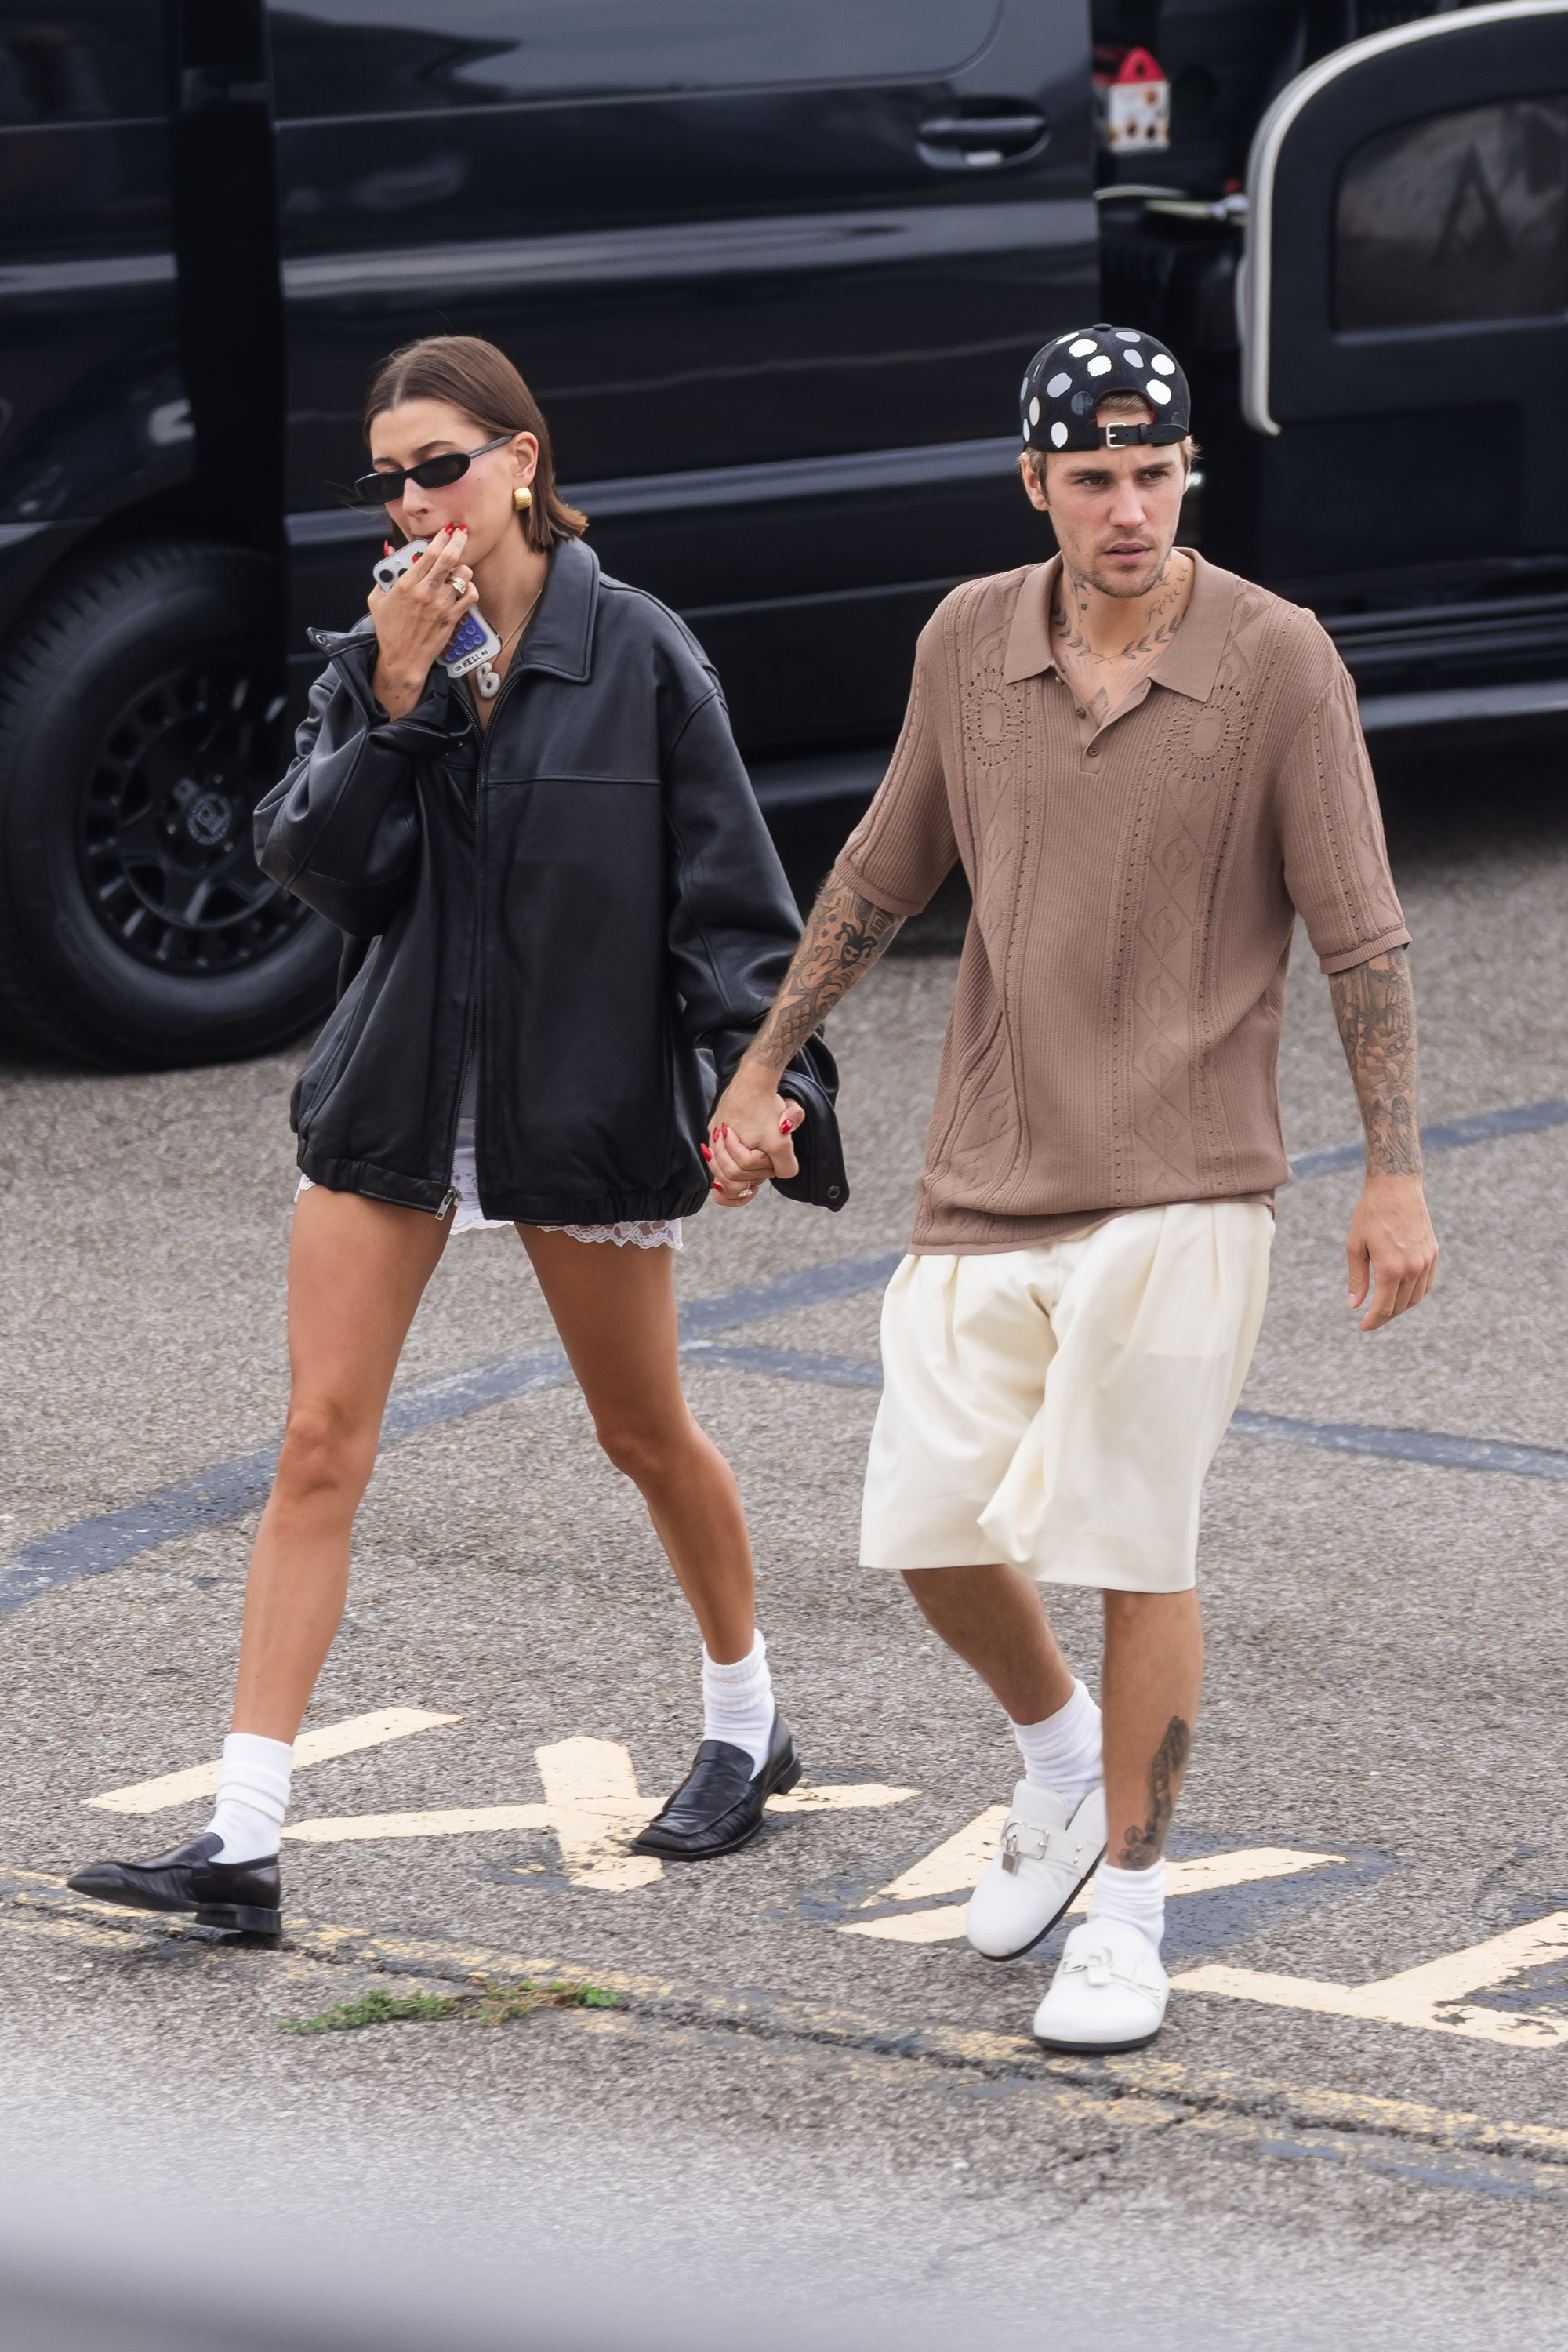 Hailey Bieber and Justin Bieber walking hand in hand, casual attire; Hailey with shorts and an oversized shirt, Justin in a cap and shorts